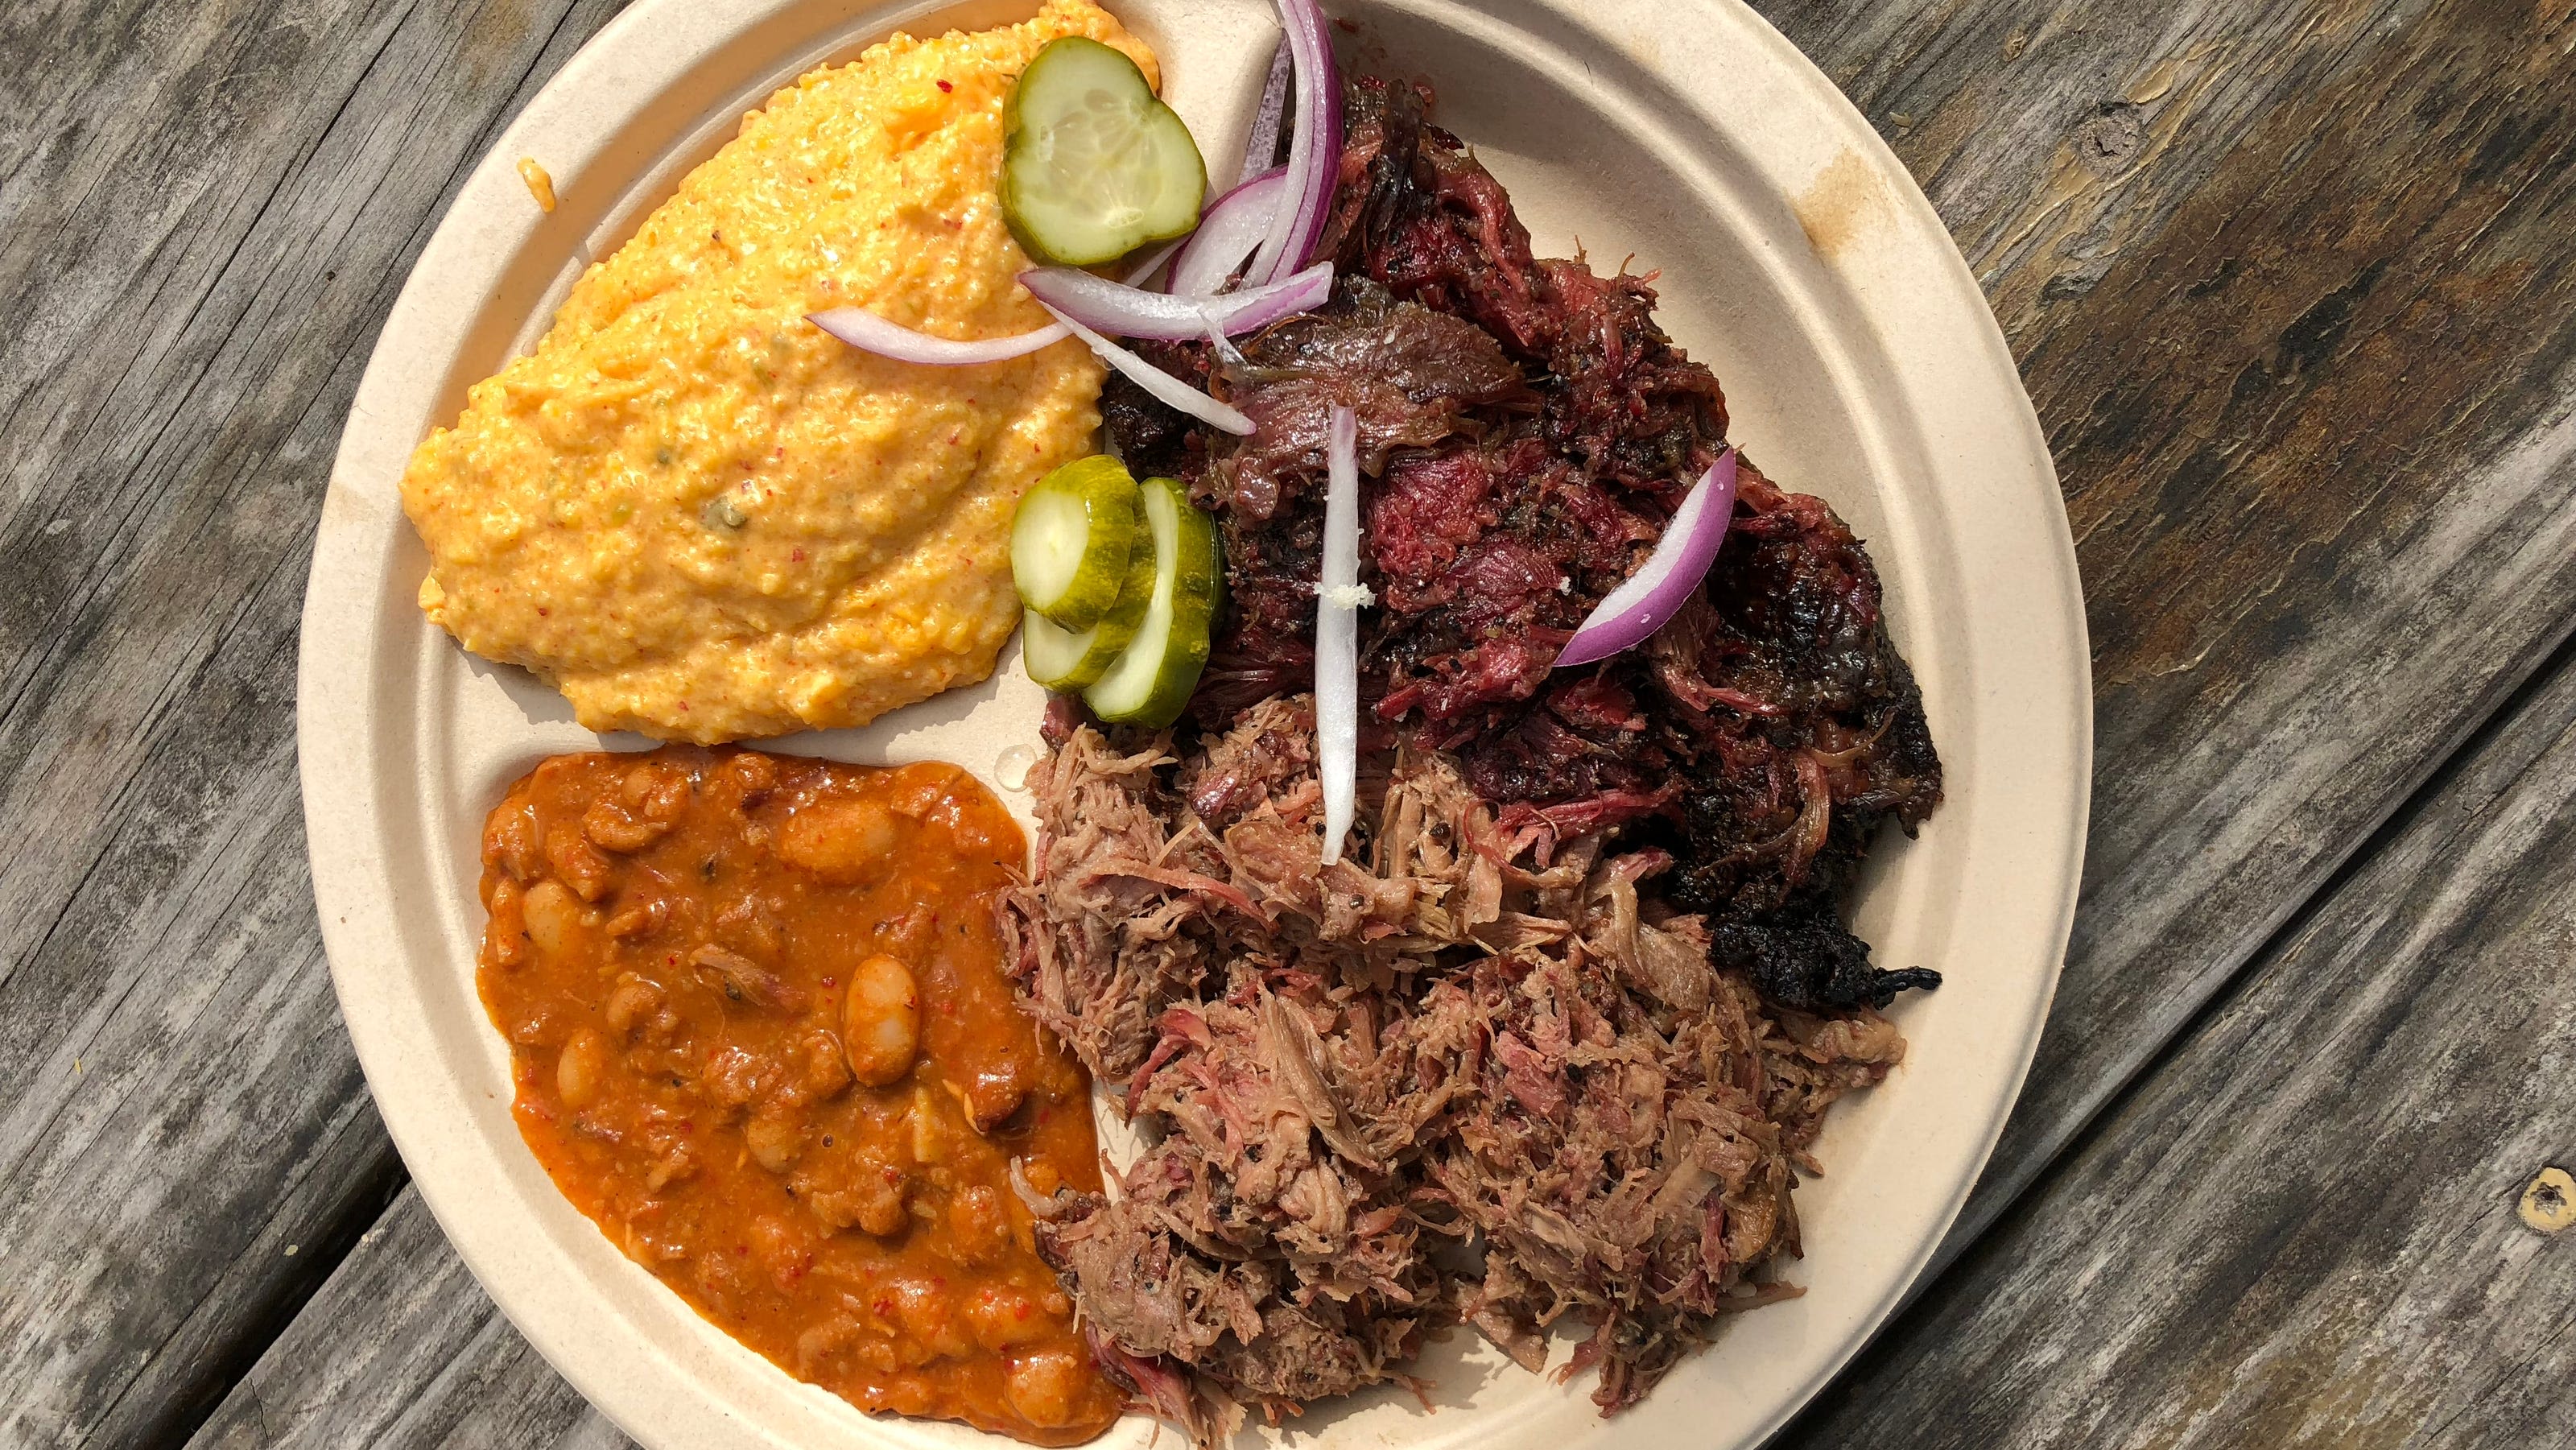 Micklethwait Craft Meats expands barbecue operation with restaurant in East Austin church